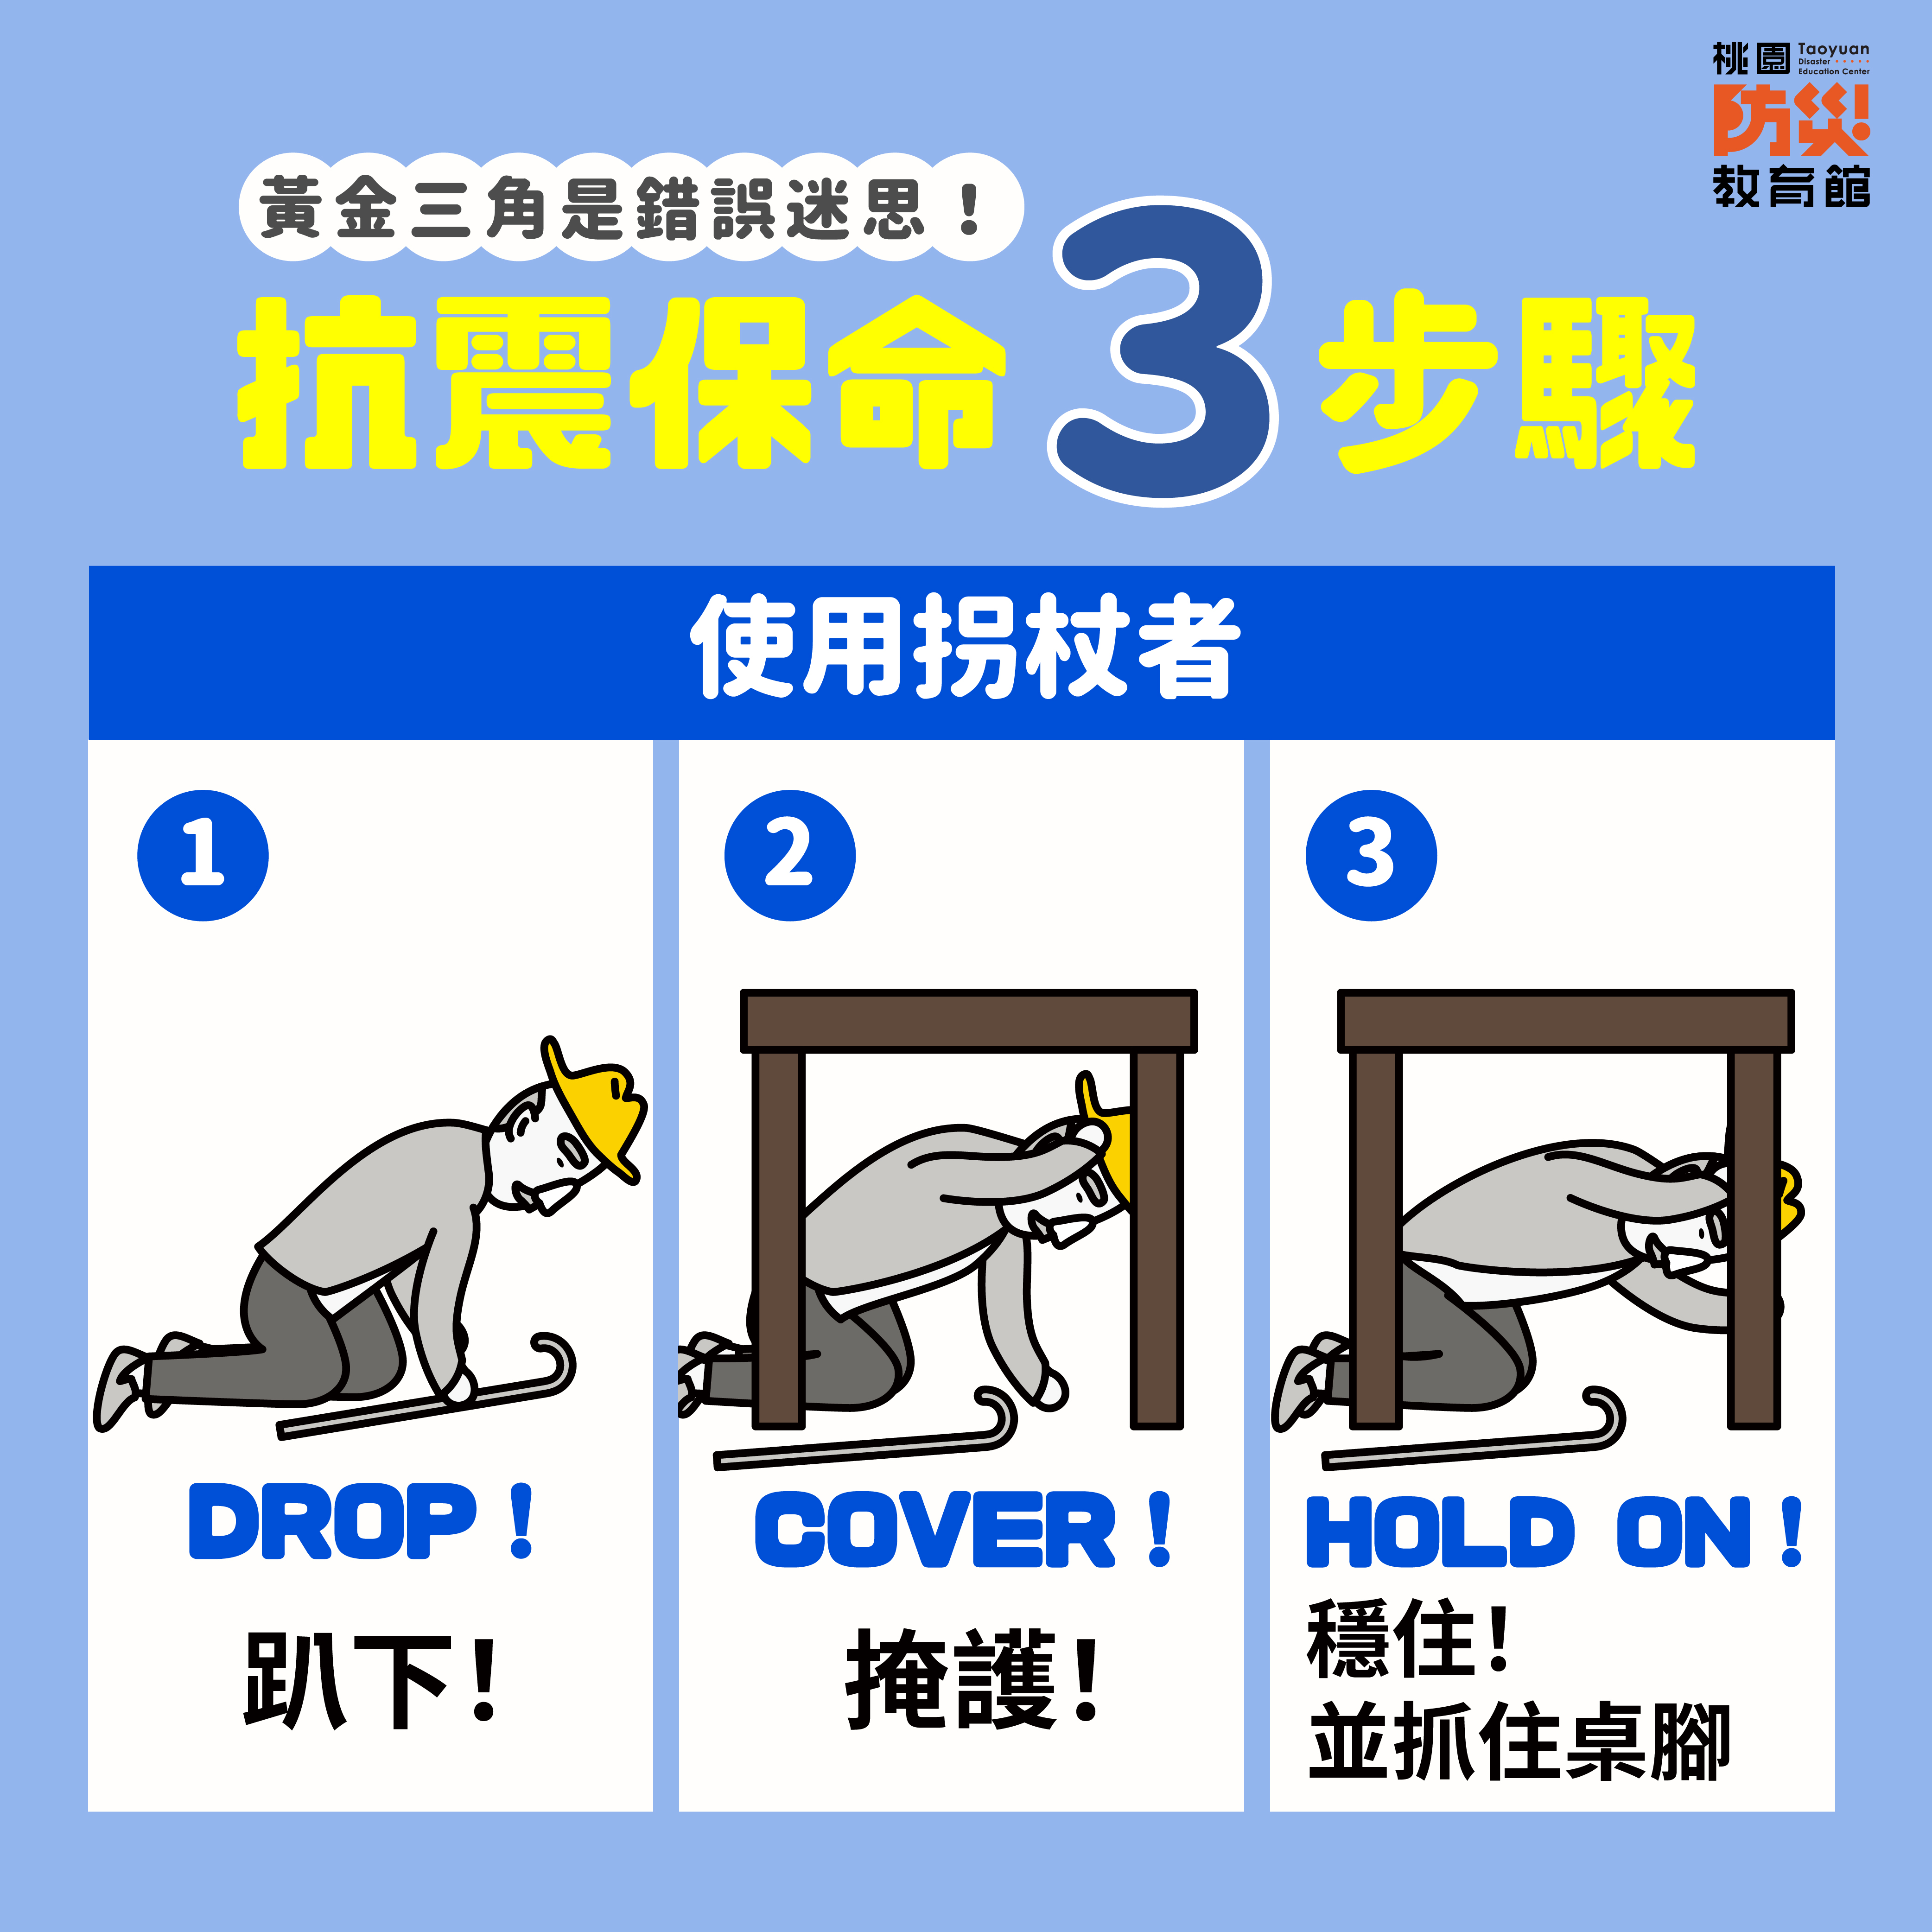 Three Life-saving Steps In An Earthquake: “Drop, Cover, and Hold on.” photo